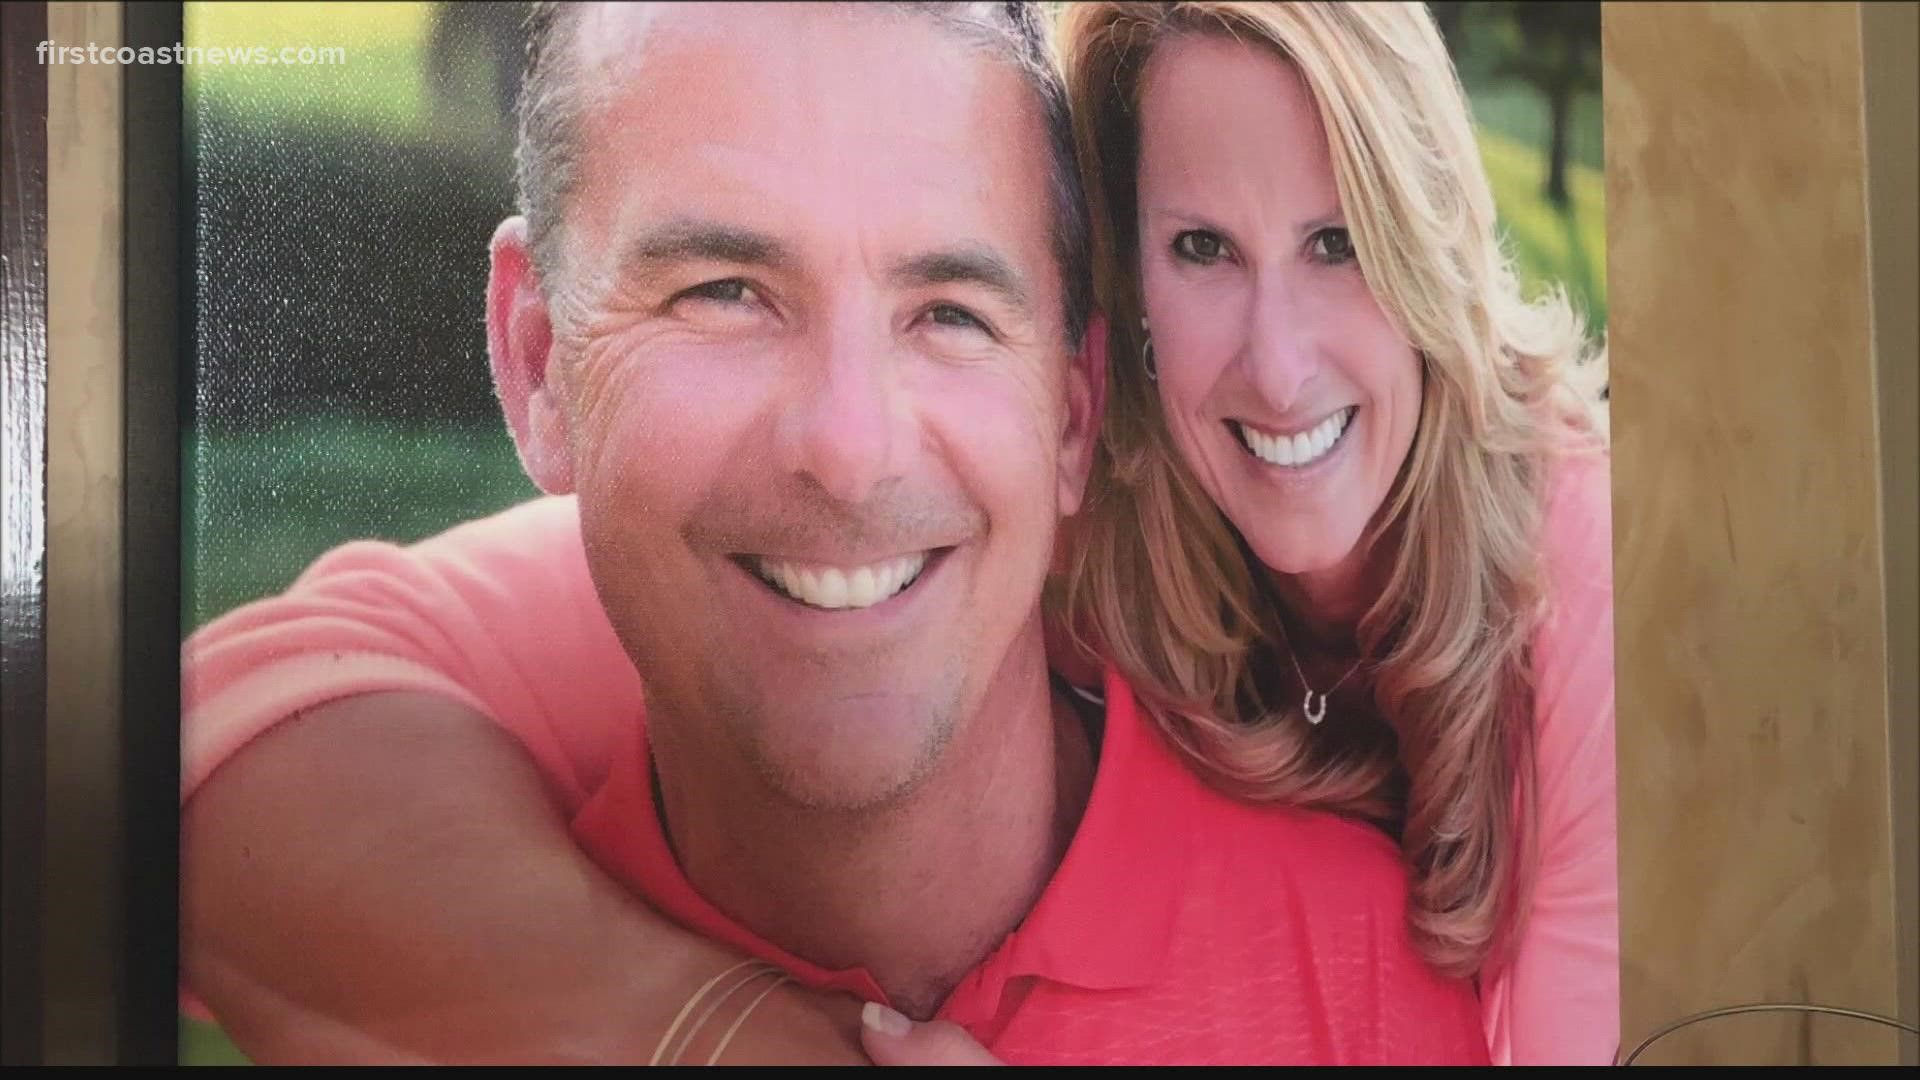 Shelley Meyer, wife of Jaguars Head Coach Urban Meyer opens up about her family life and how they stay strong.